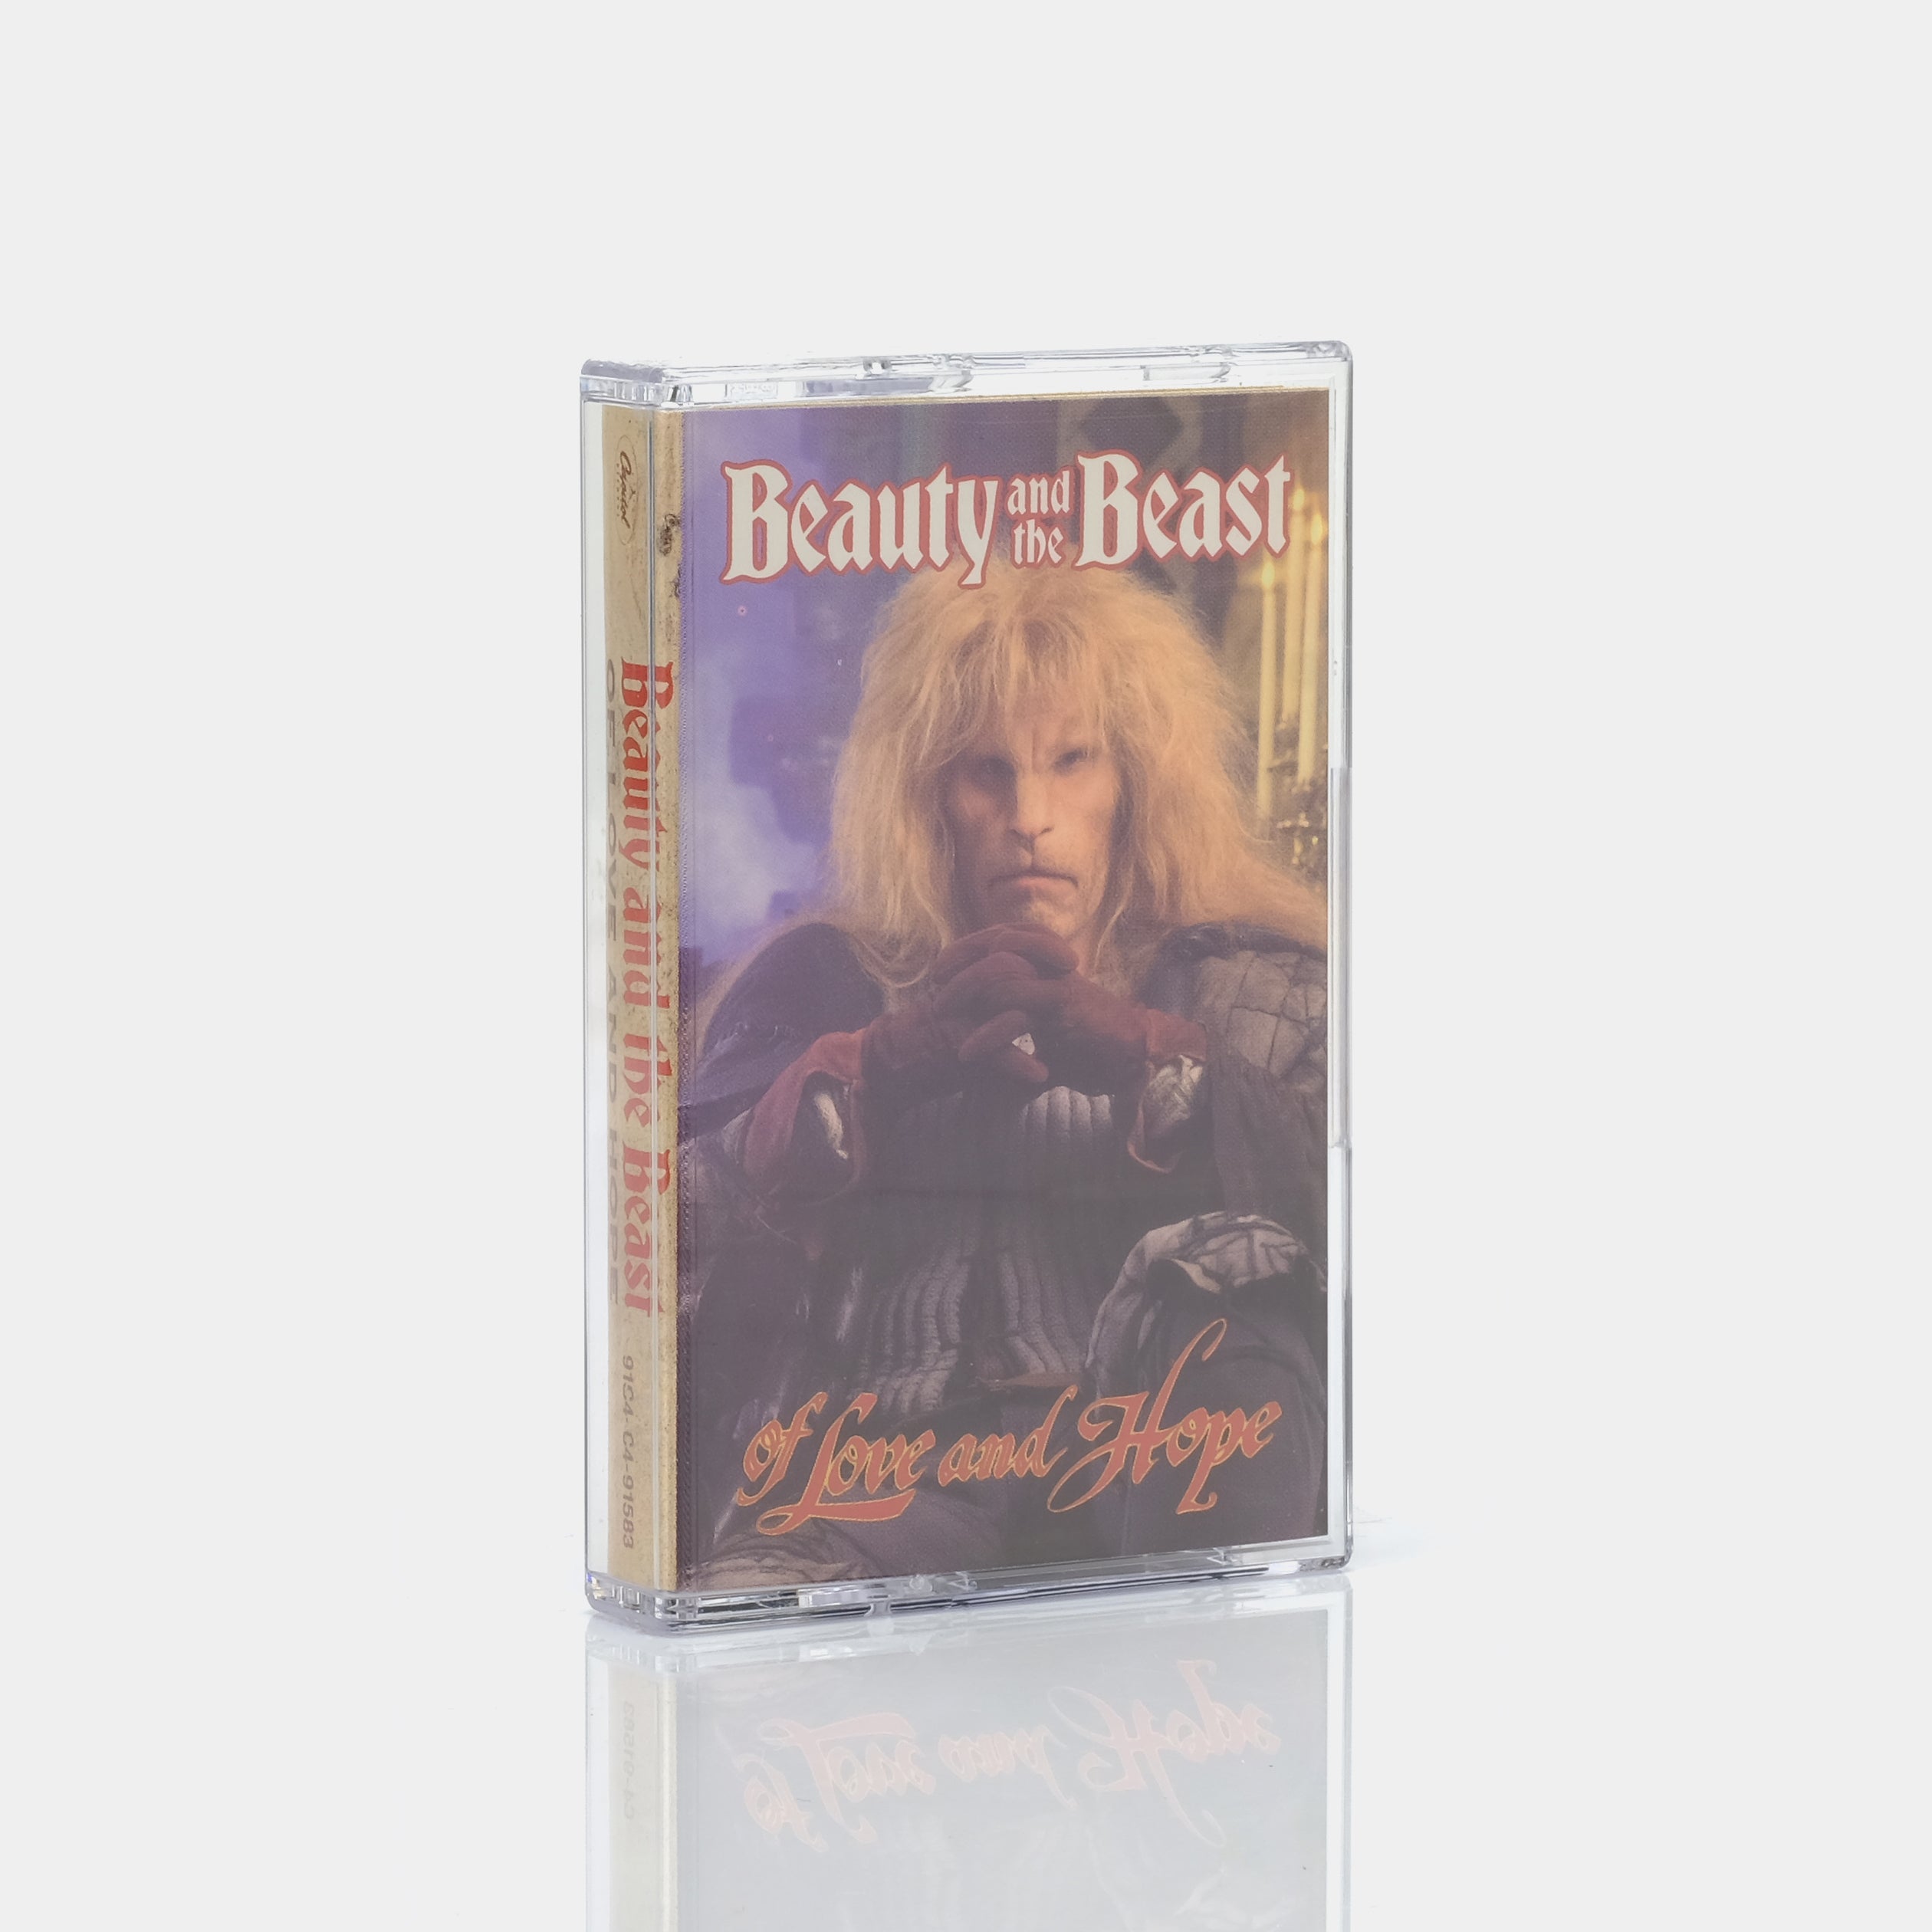 Beauty And The Beast - Of Love And Hope Cassette Tape